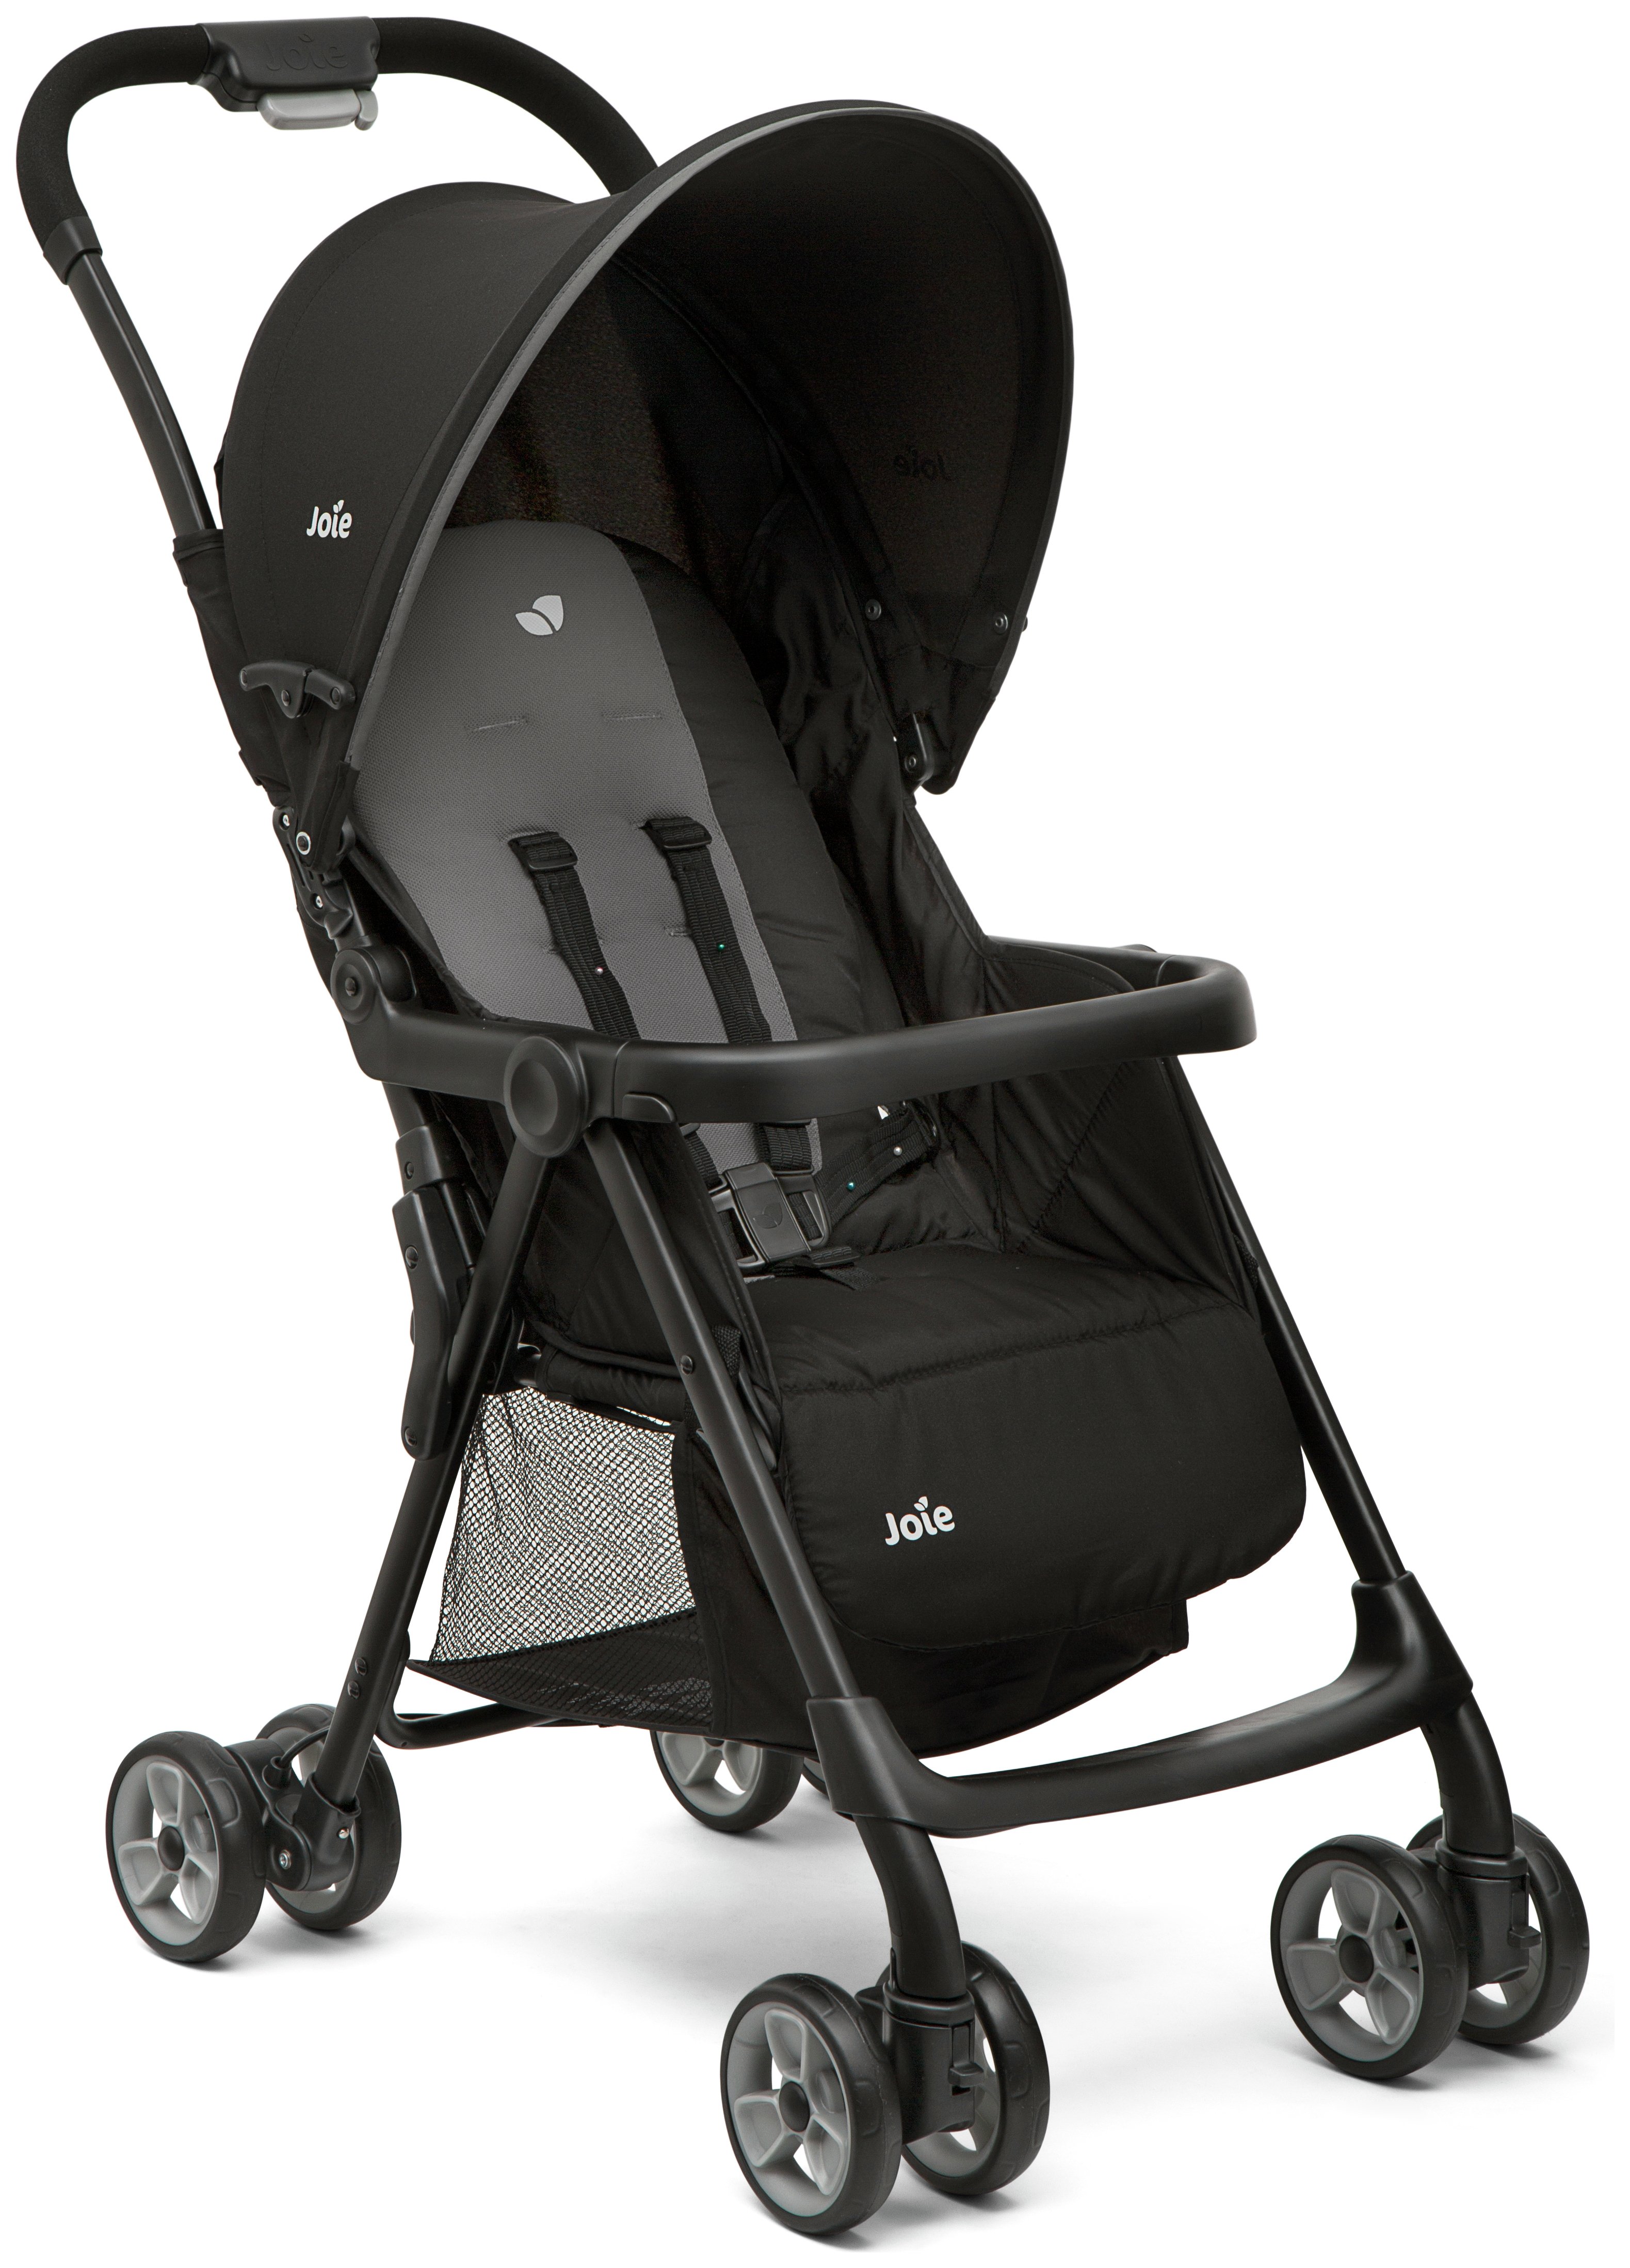 Joie Juva Travel System Review